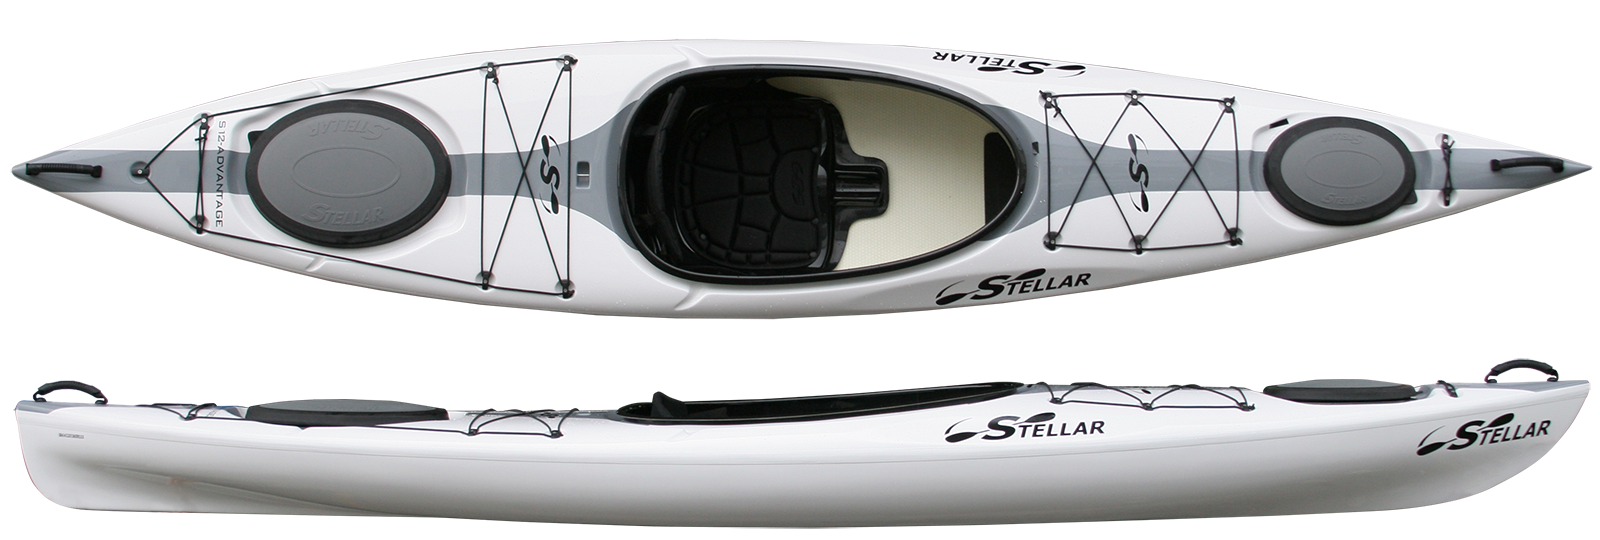 Stellar 12' Touring Kayak (S12) - Stellar - Innovative Performance Surf Skis, Racing Kayaks, Touring Kayaks, Stand Up Paddleboards, Paddles and Accessories.